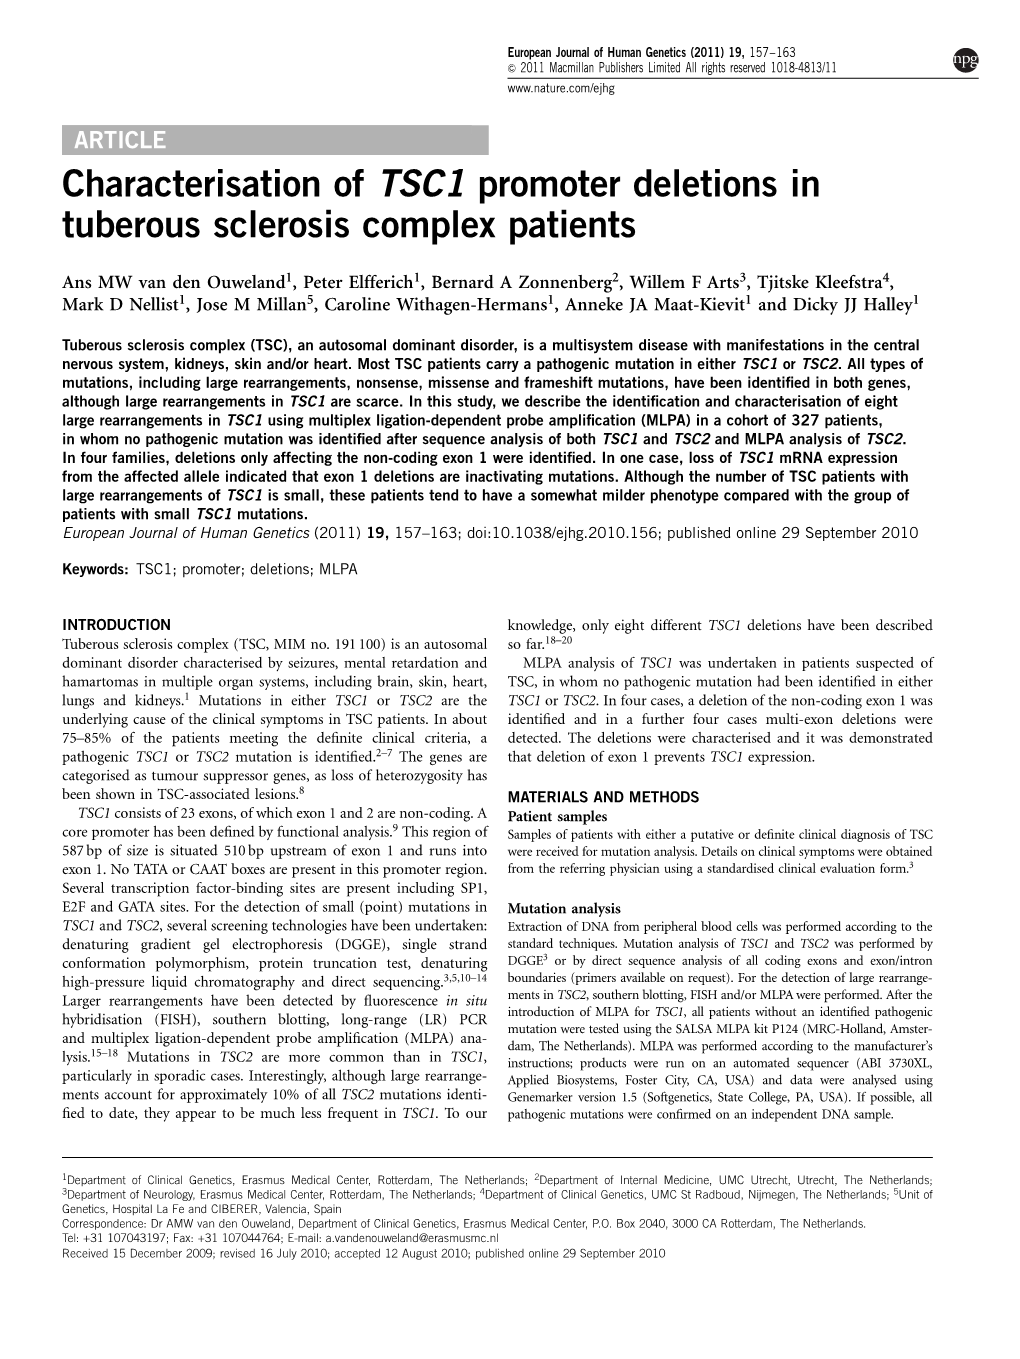 Characterisation of TSC1 Promoter Deletions in Tuberous Sclerosis Complex Patients